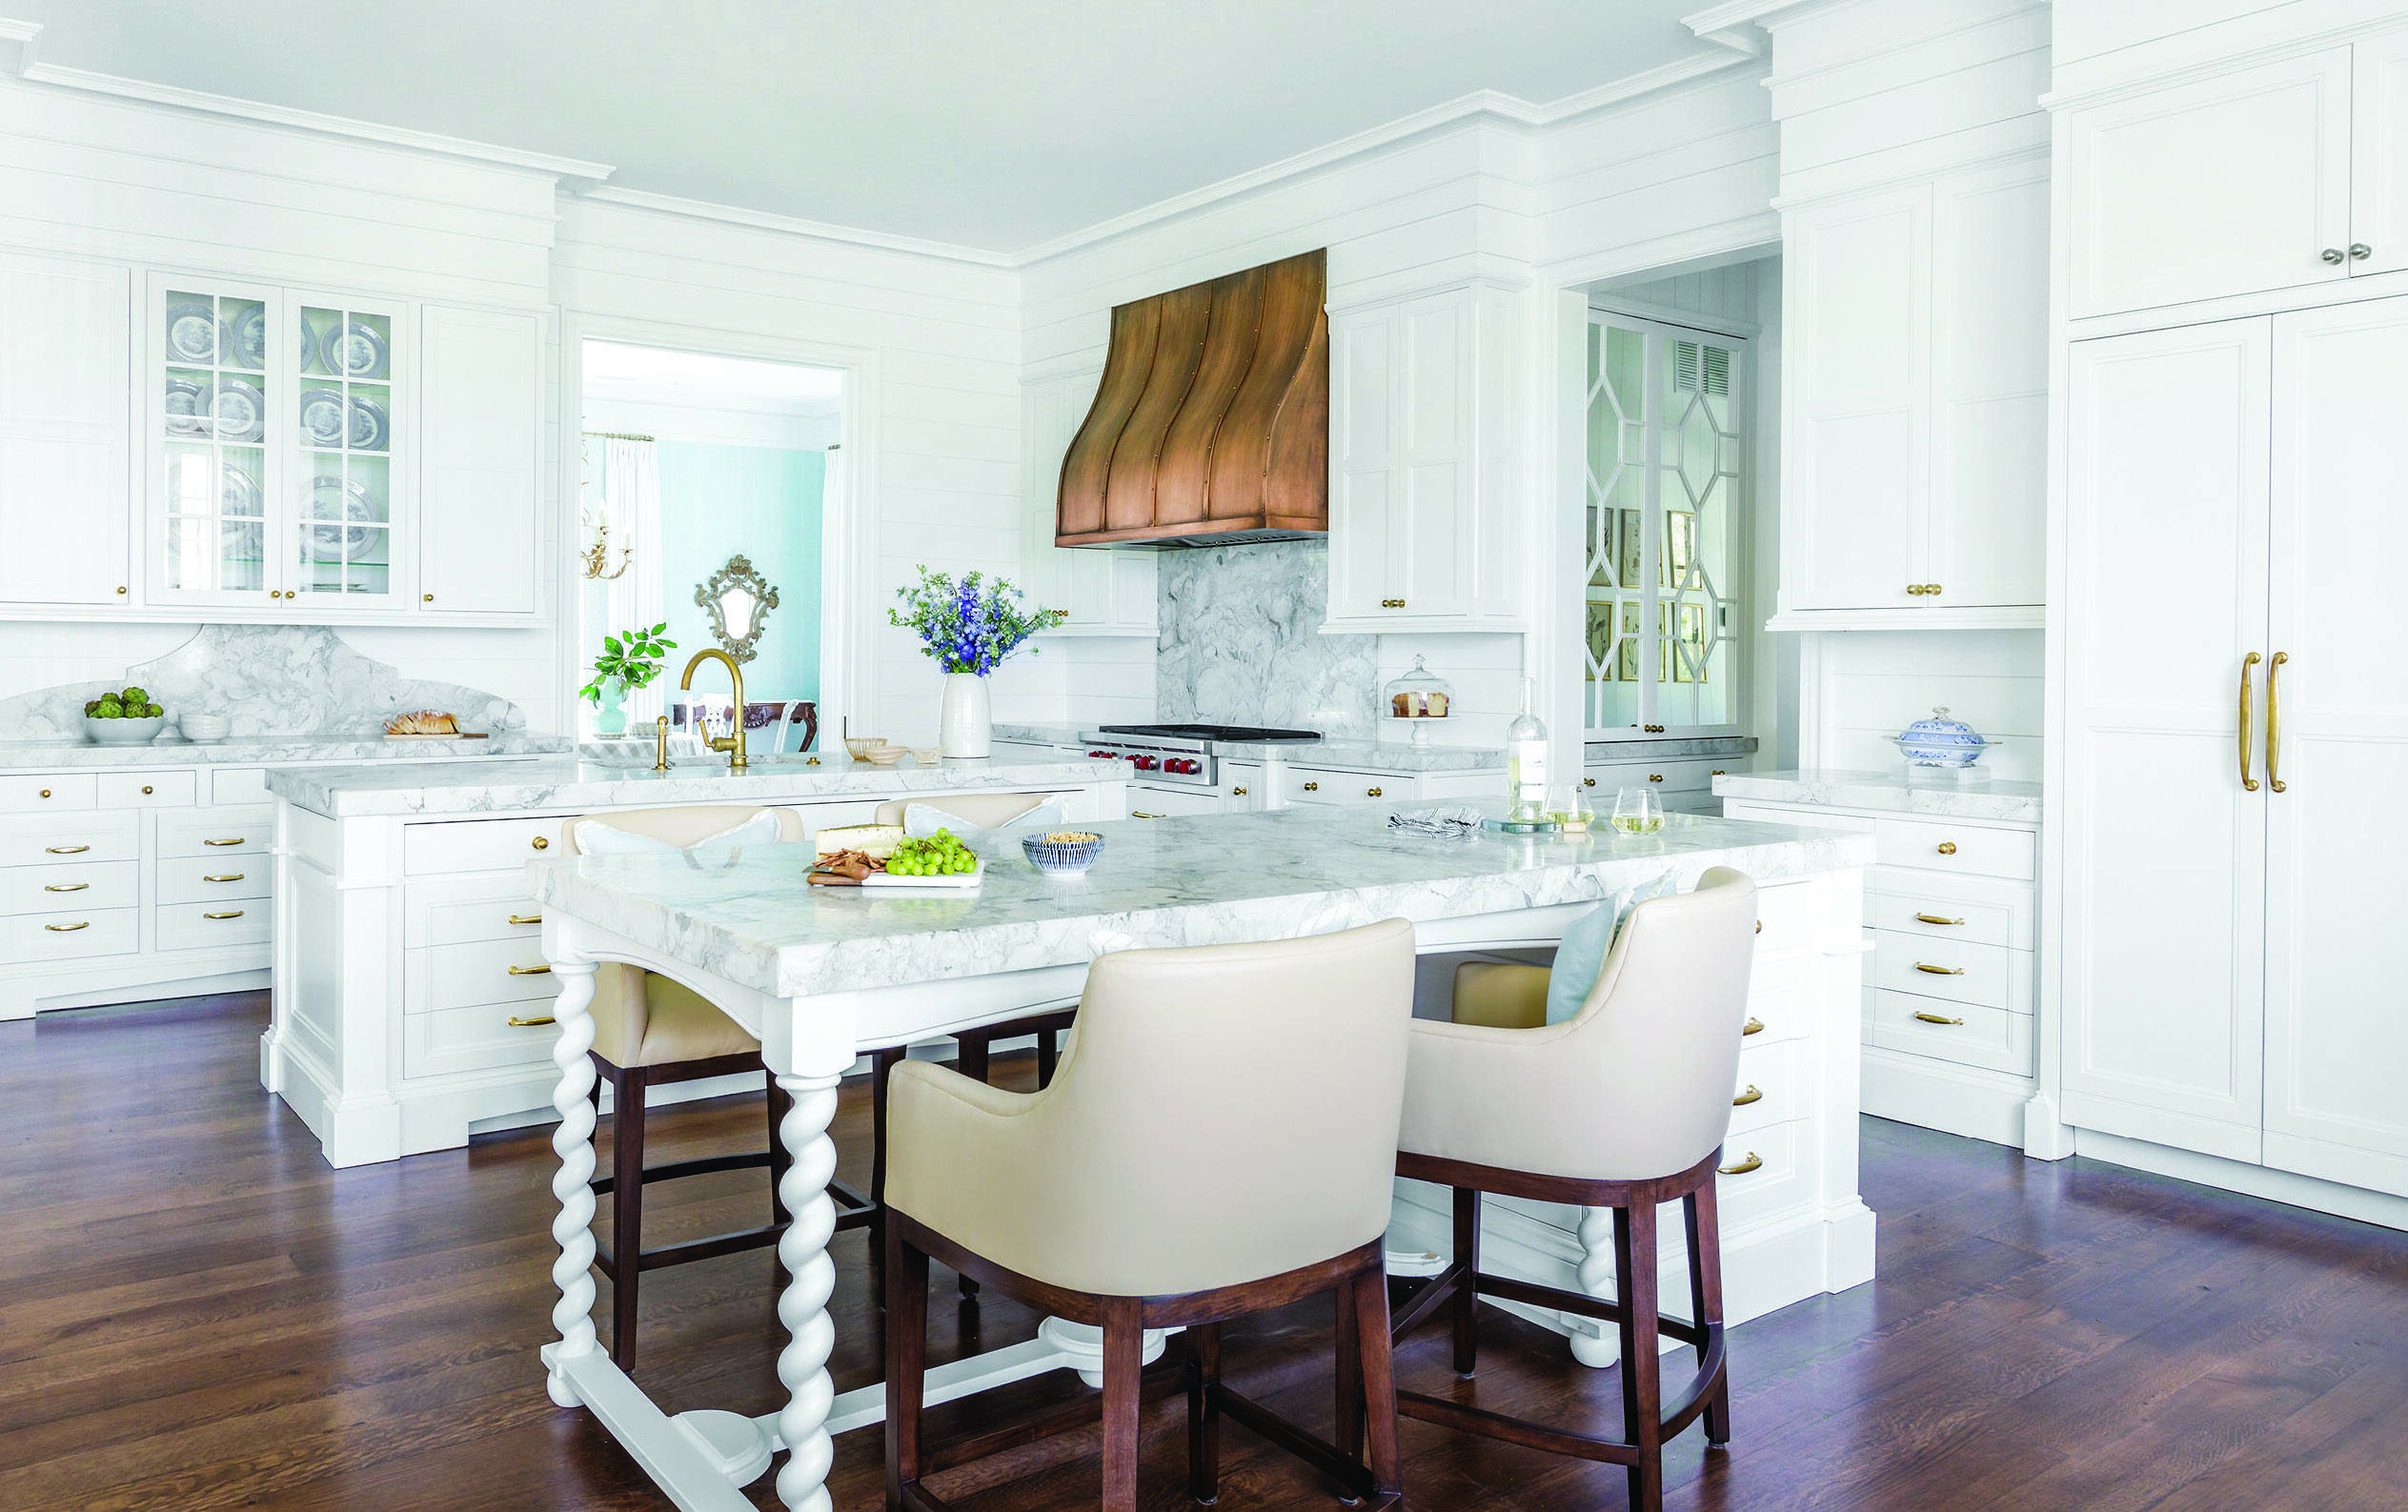 Huff-Dewberry and Architects Spitzmiller & Norris Bring Style to Amelia Island Home